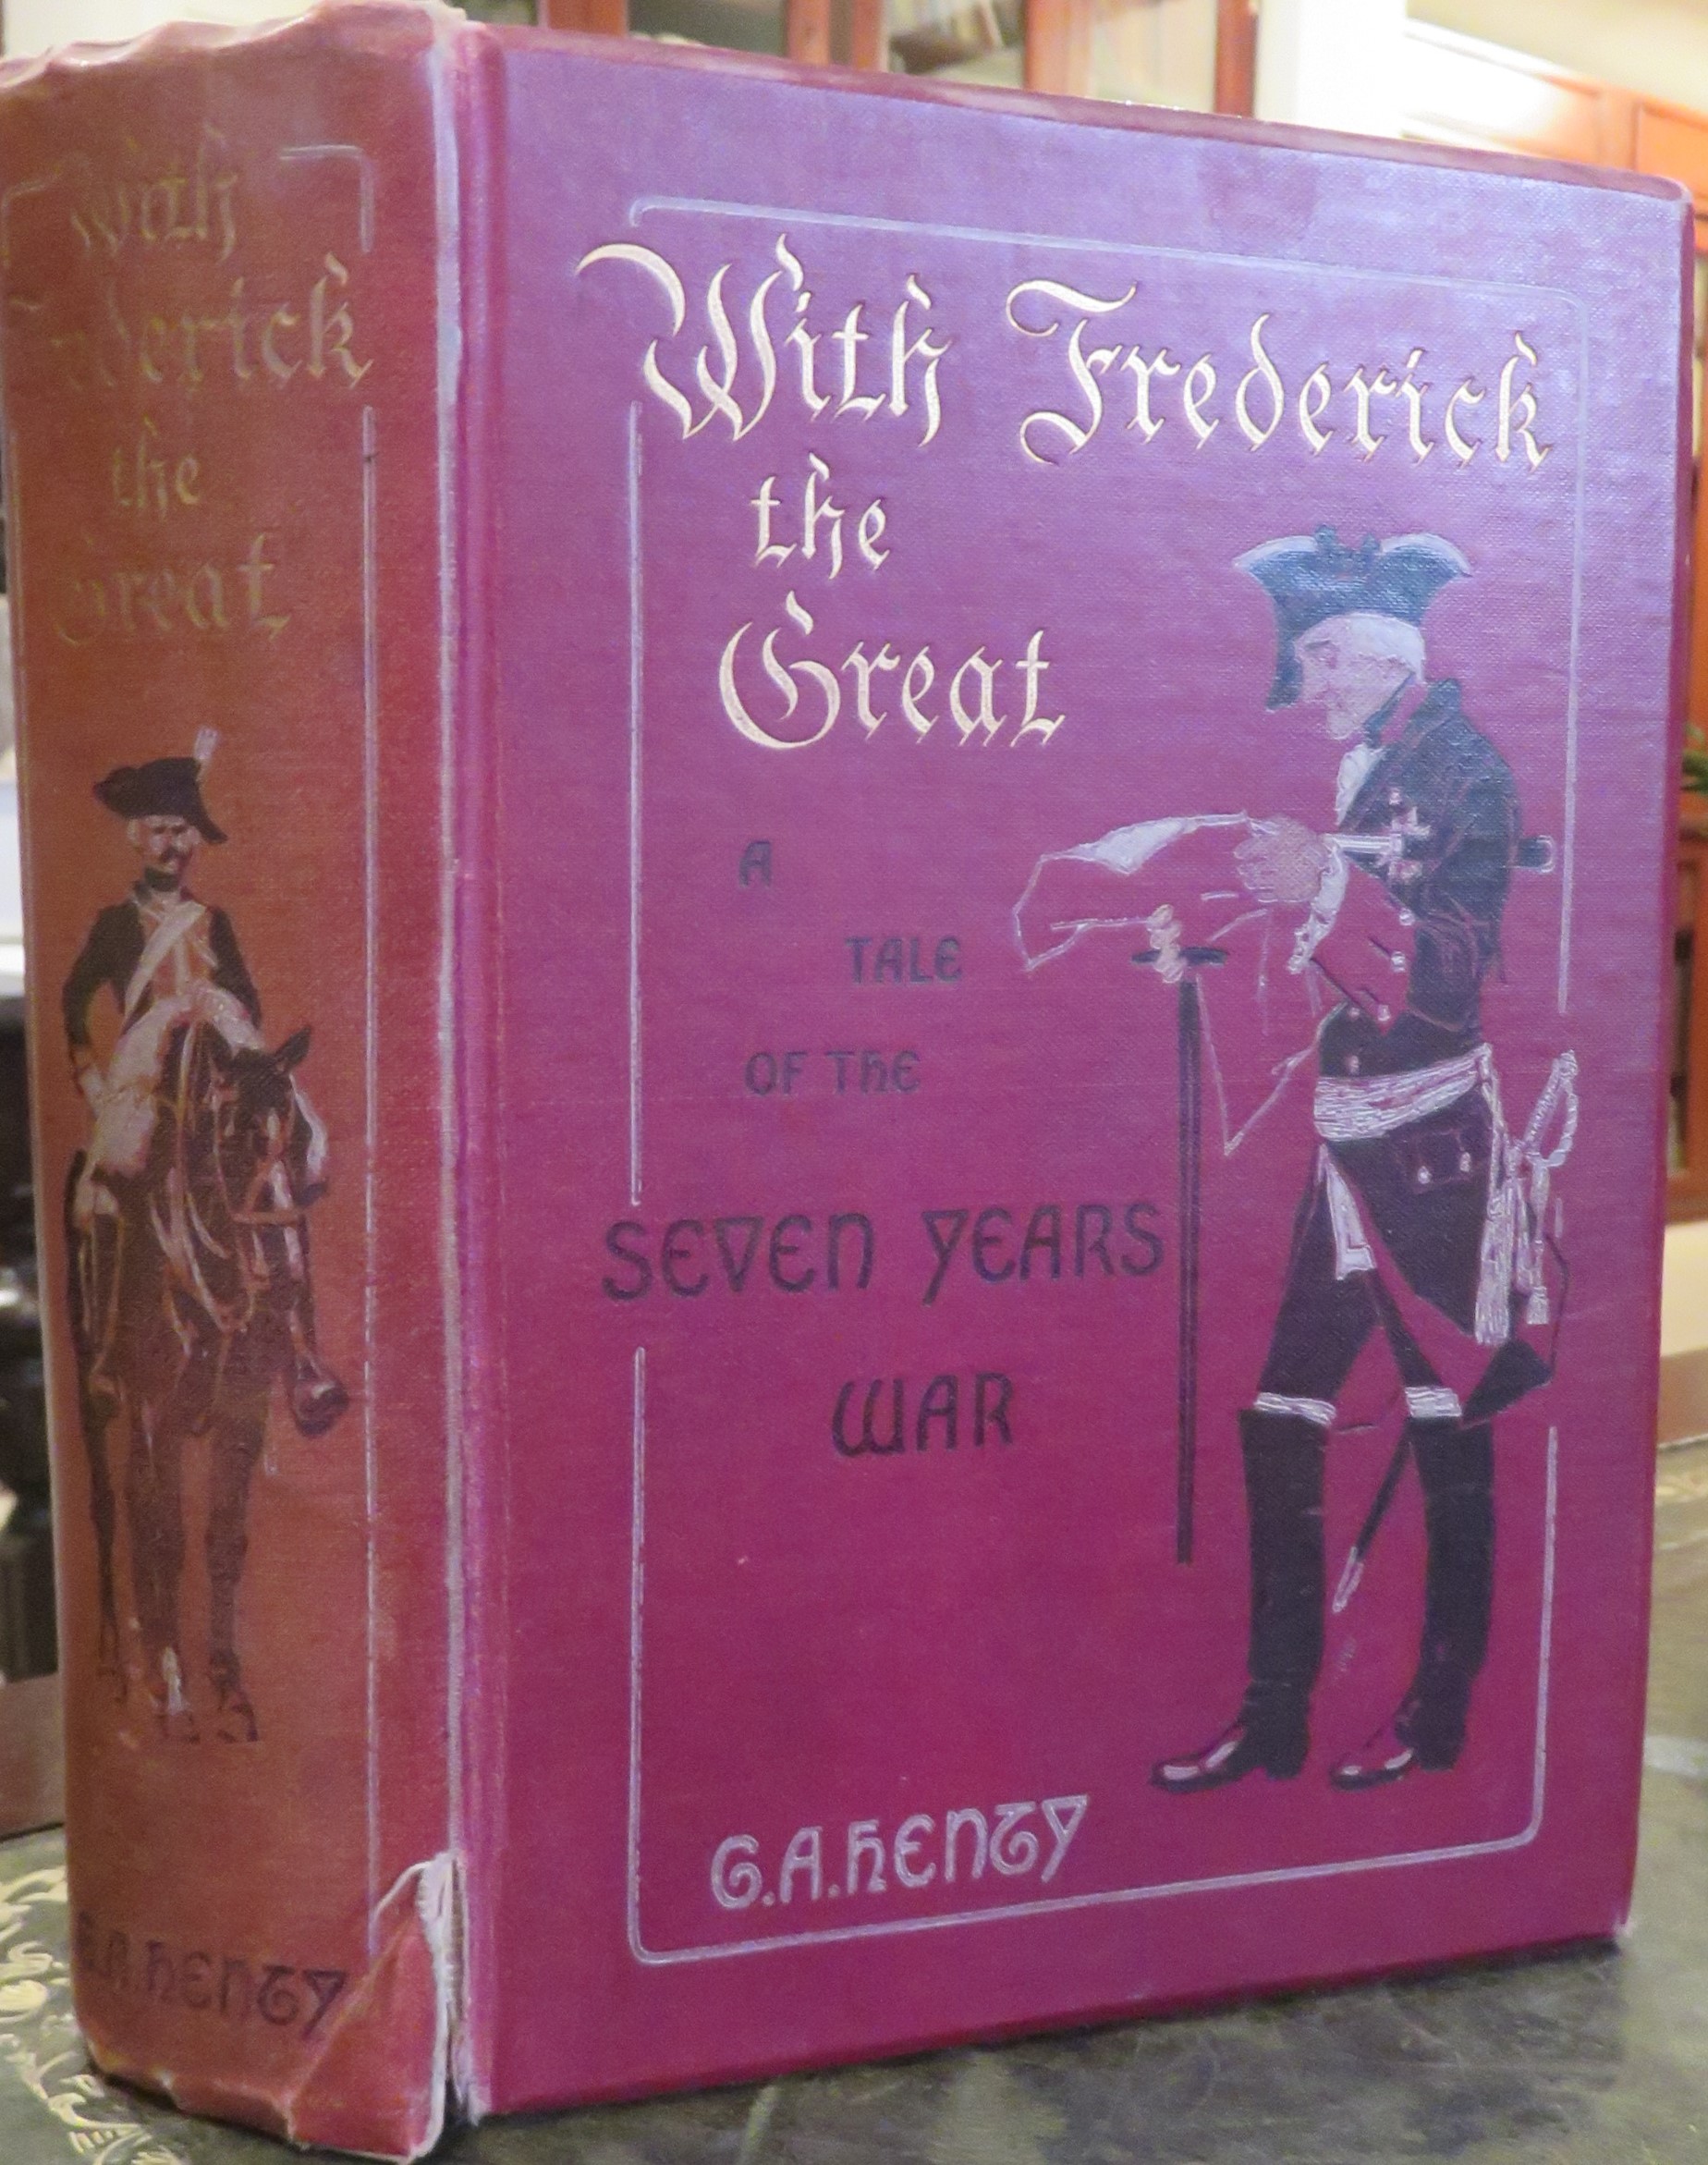 With Fredrick the Great: A Story of the Seven Years' War